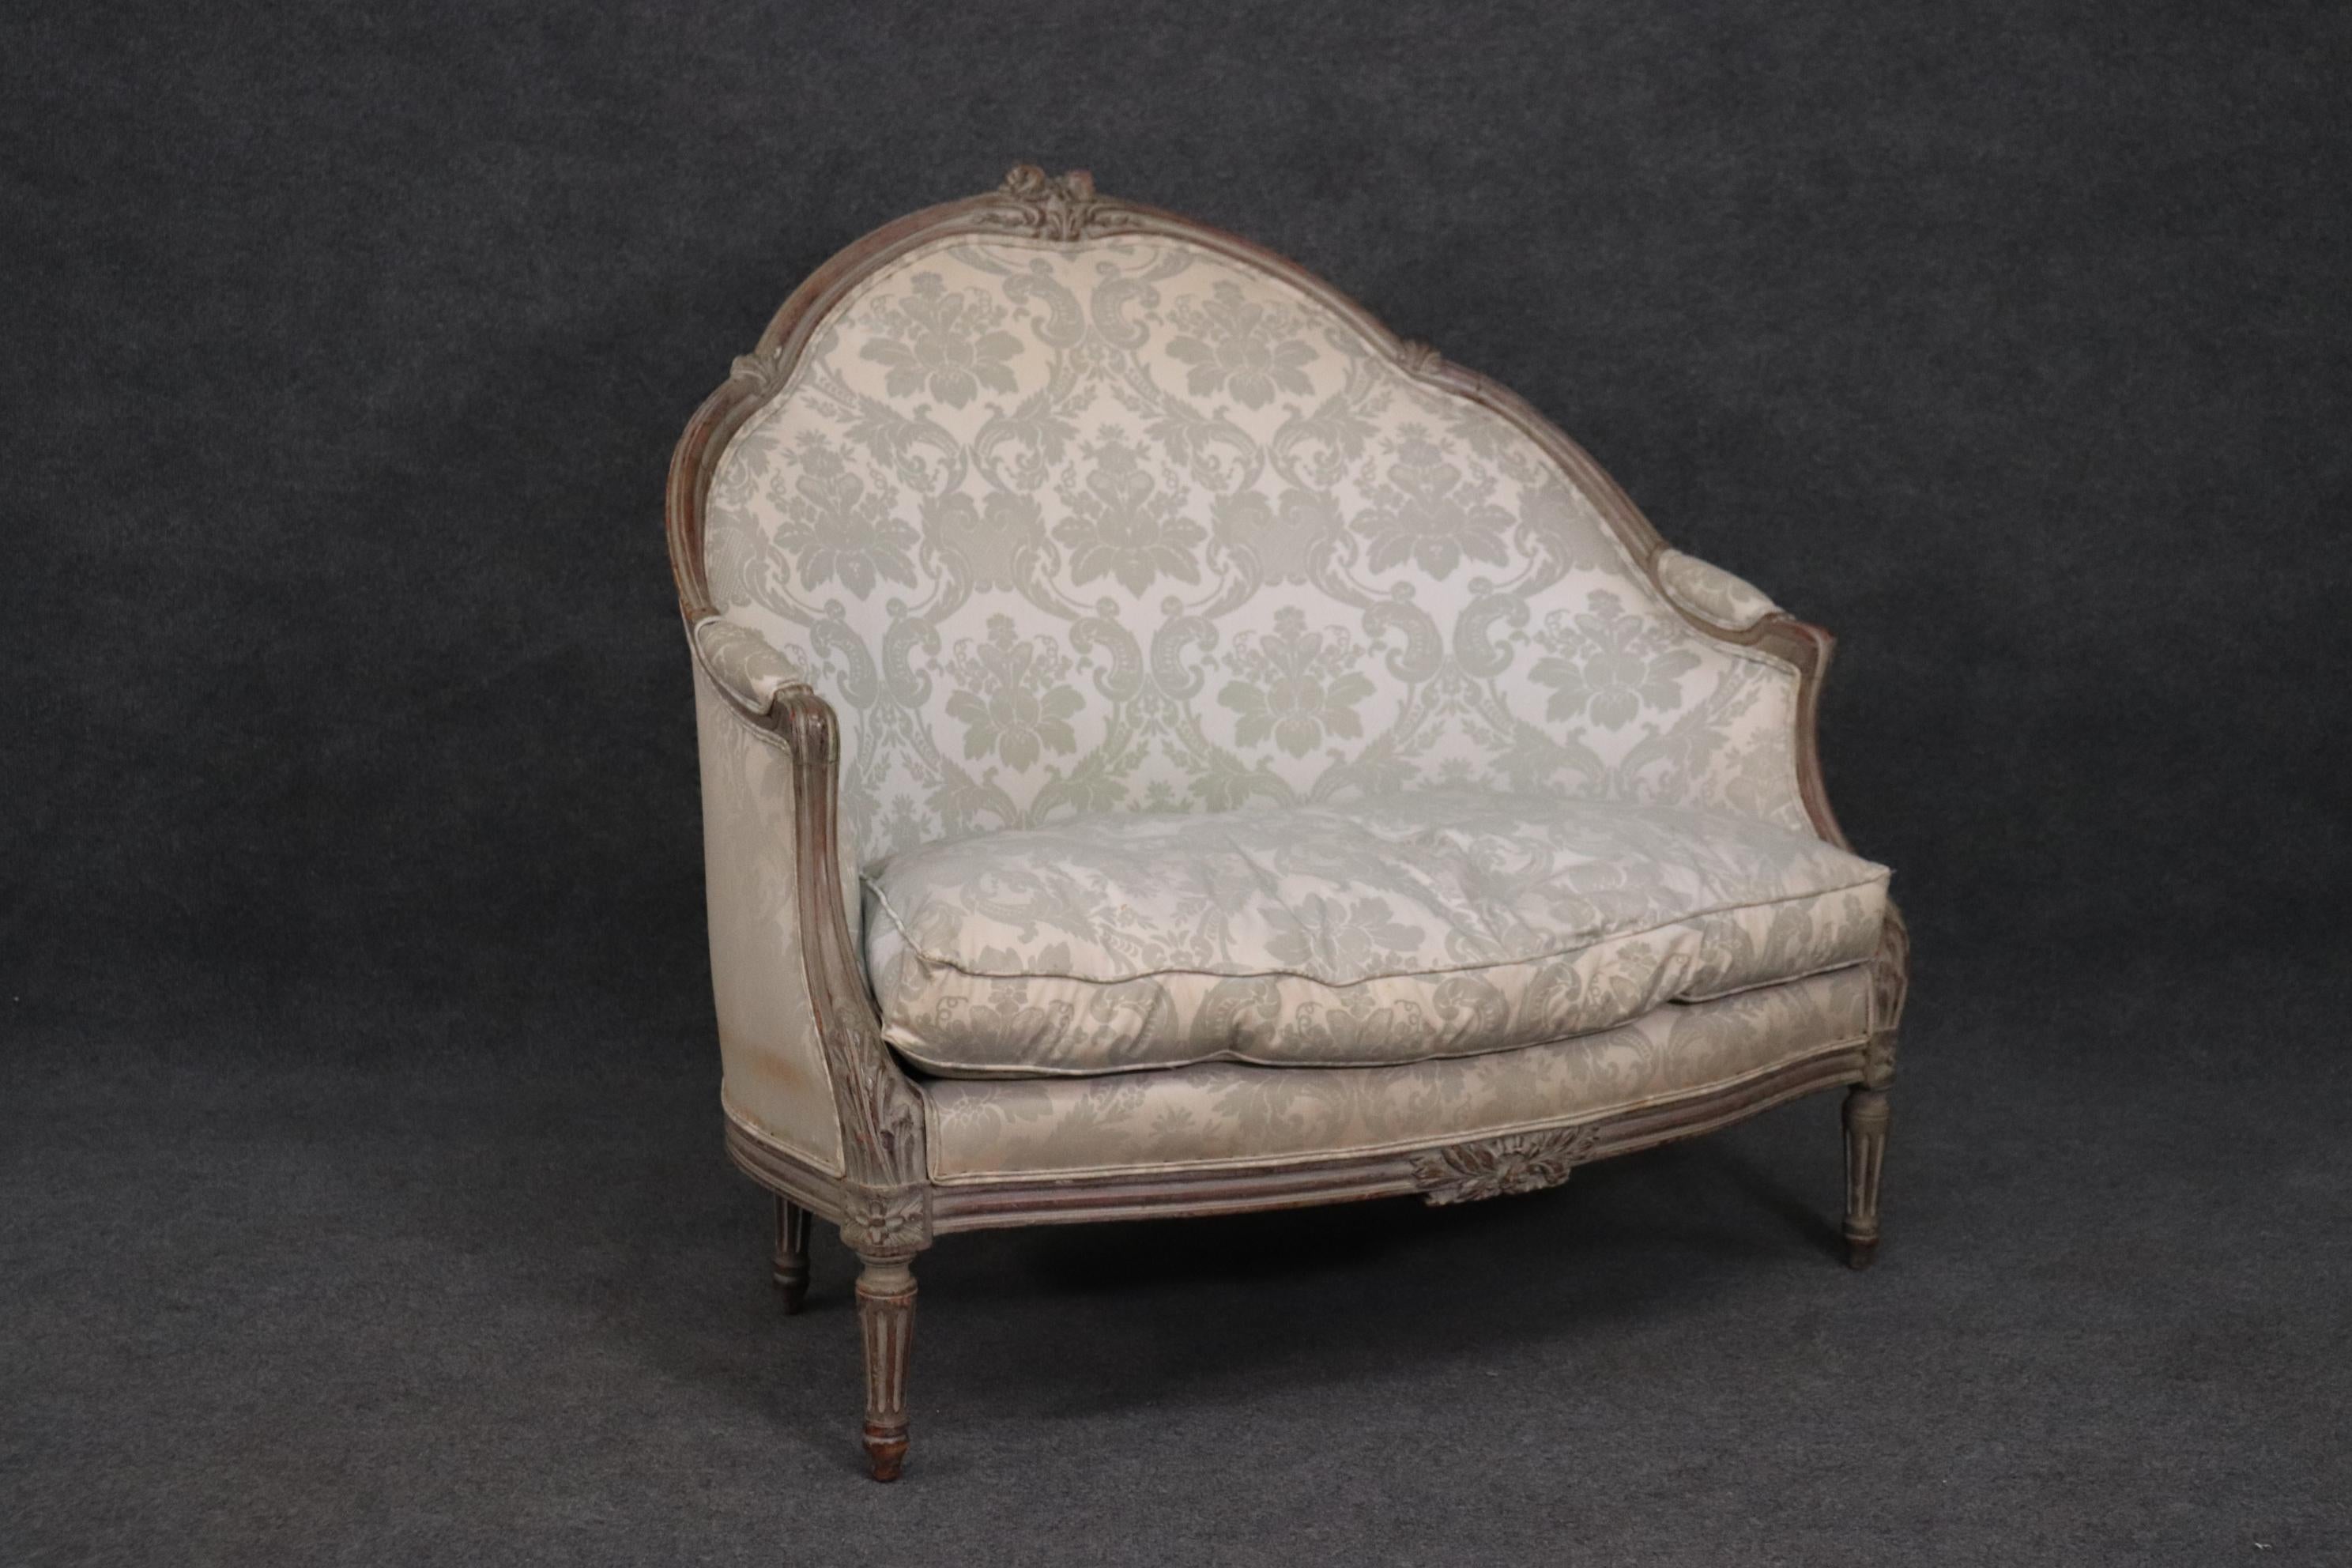 This is a superbly carved painted Louis XV style canape. The design and the carving are just spectacular and beautifully done. The upholstery is obviously not perfect but can be reupholstered. The frame measures 42 x 42 x 31 deep and teh seat height